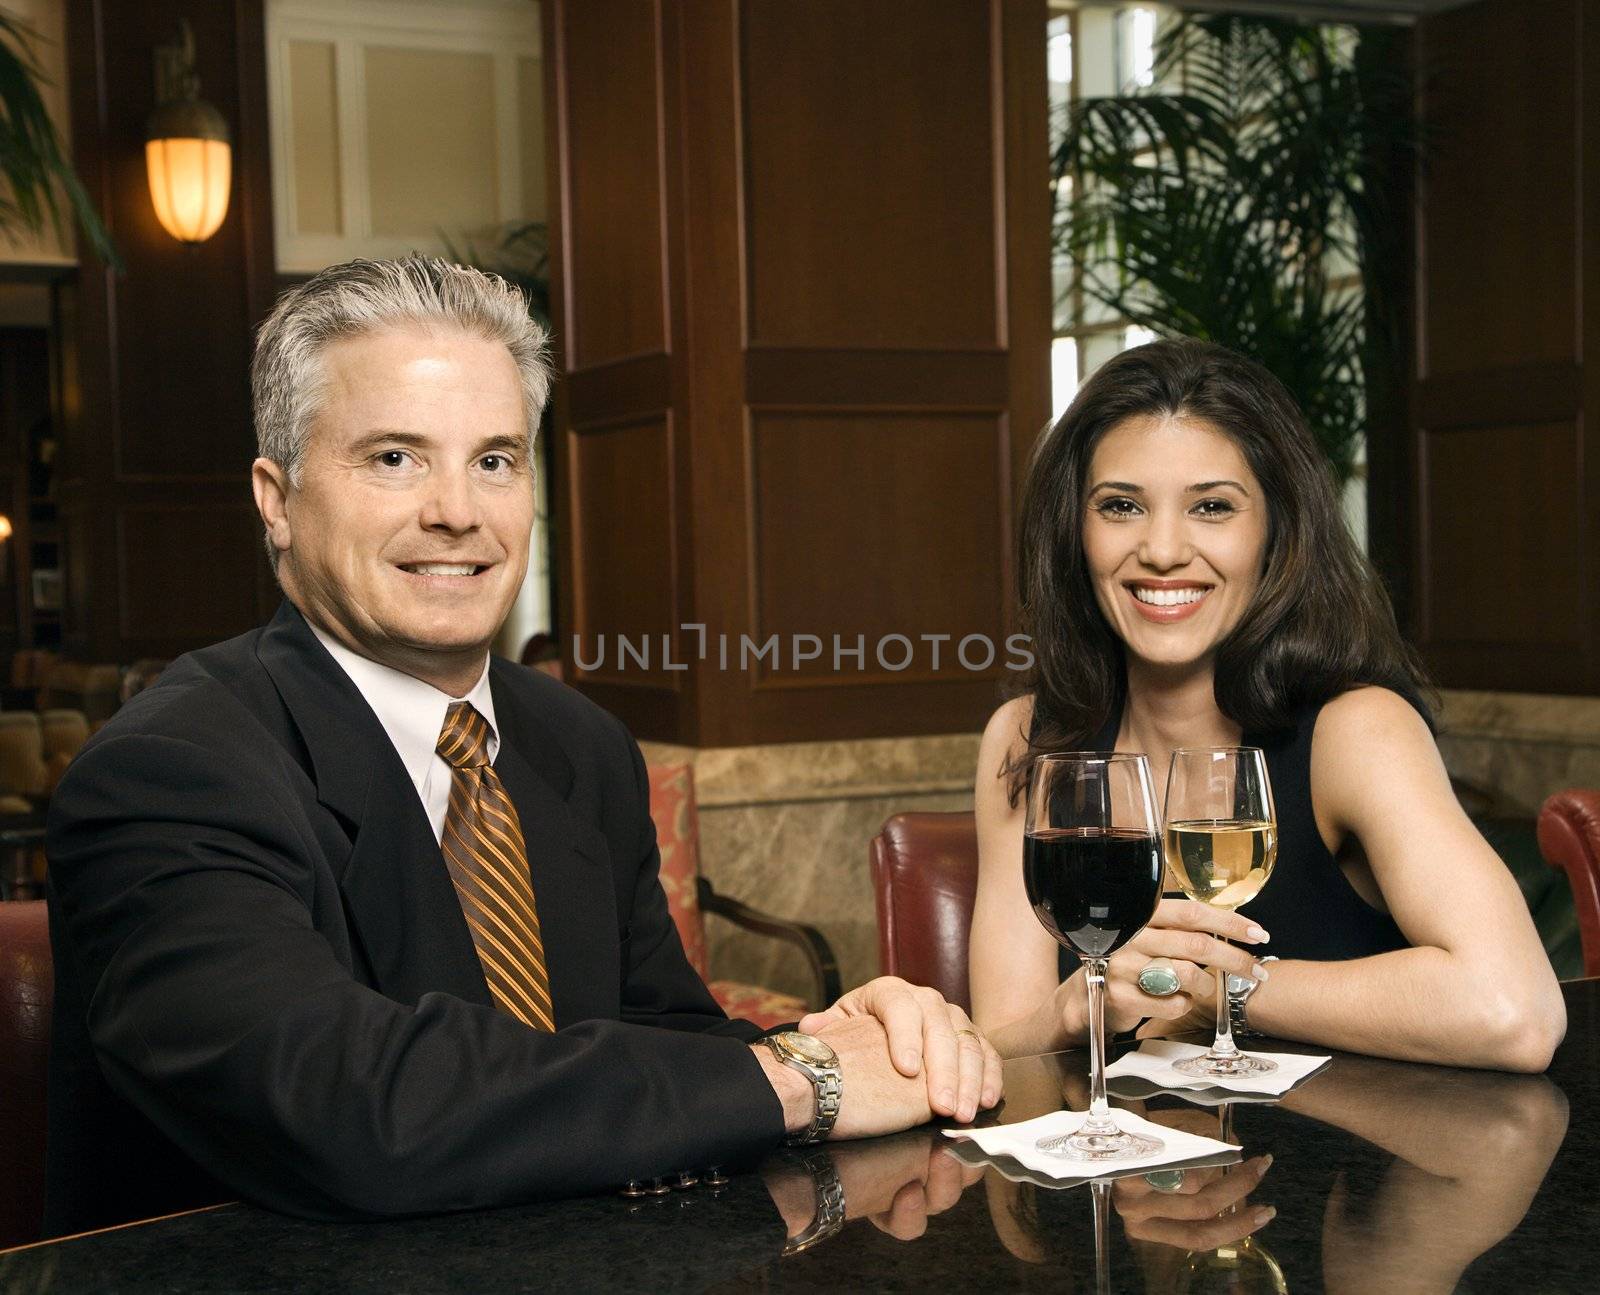 Prime adult Hispanic female and Caucasian prime adult male sitting at bar looking at viewer smiling.